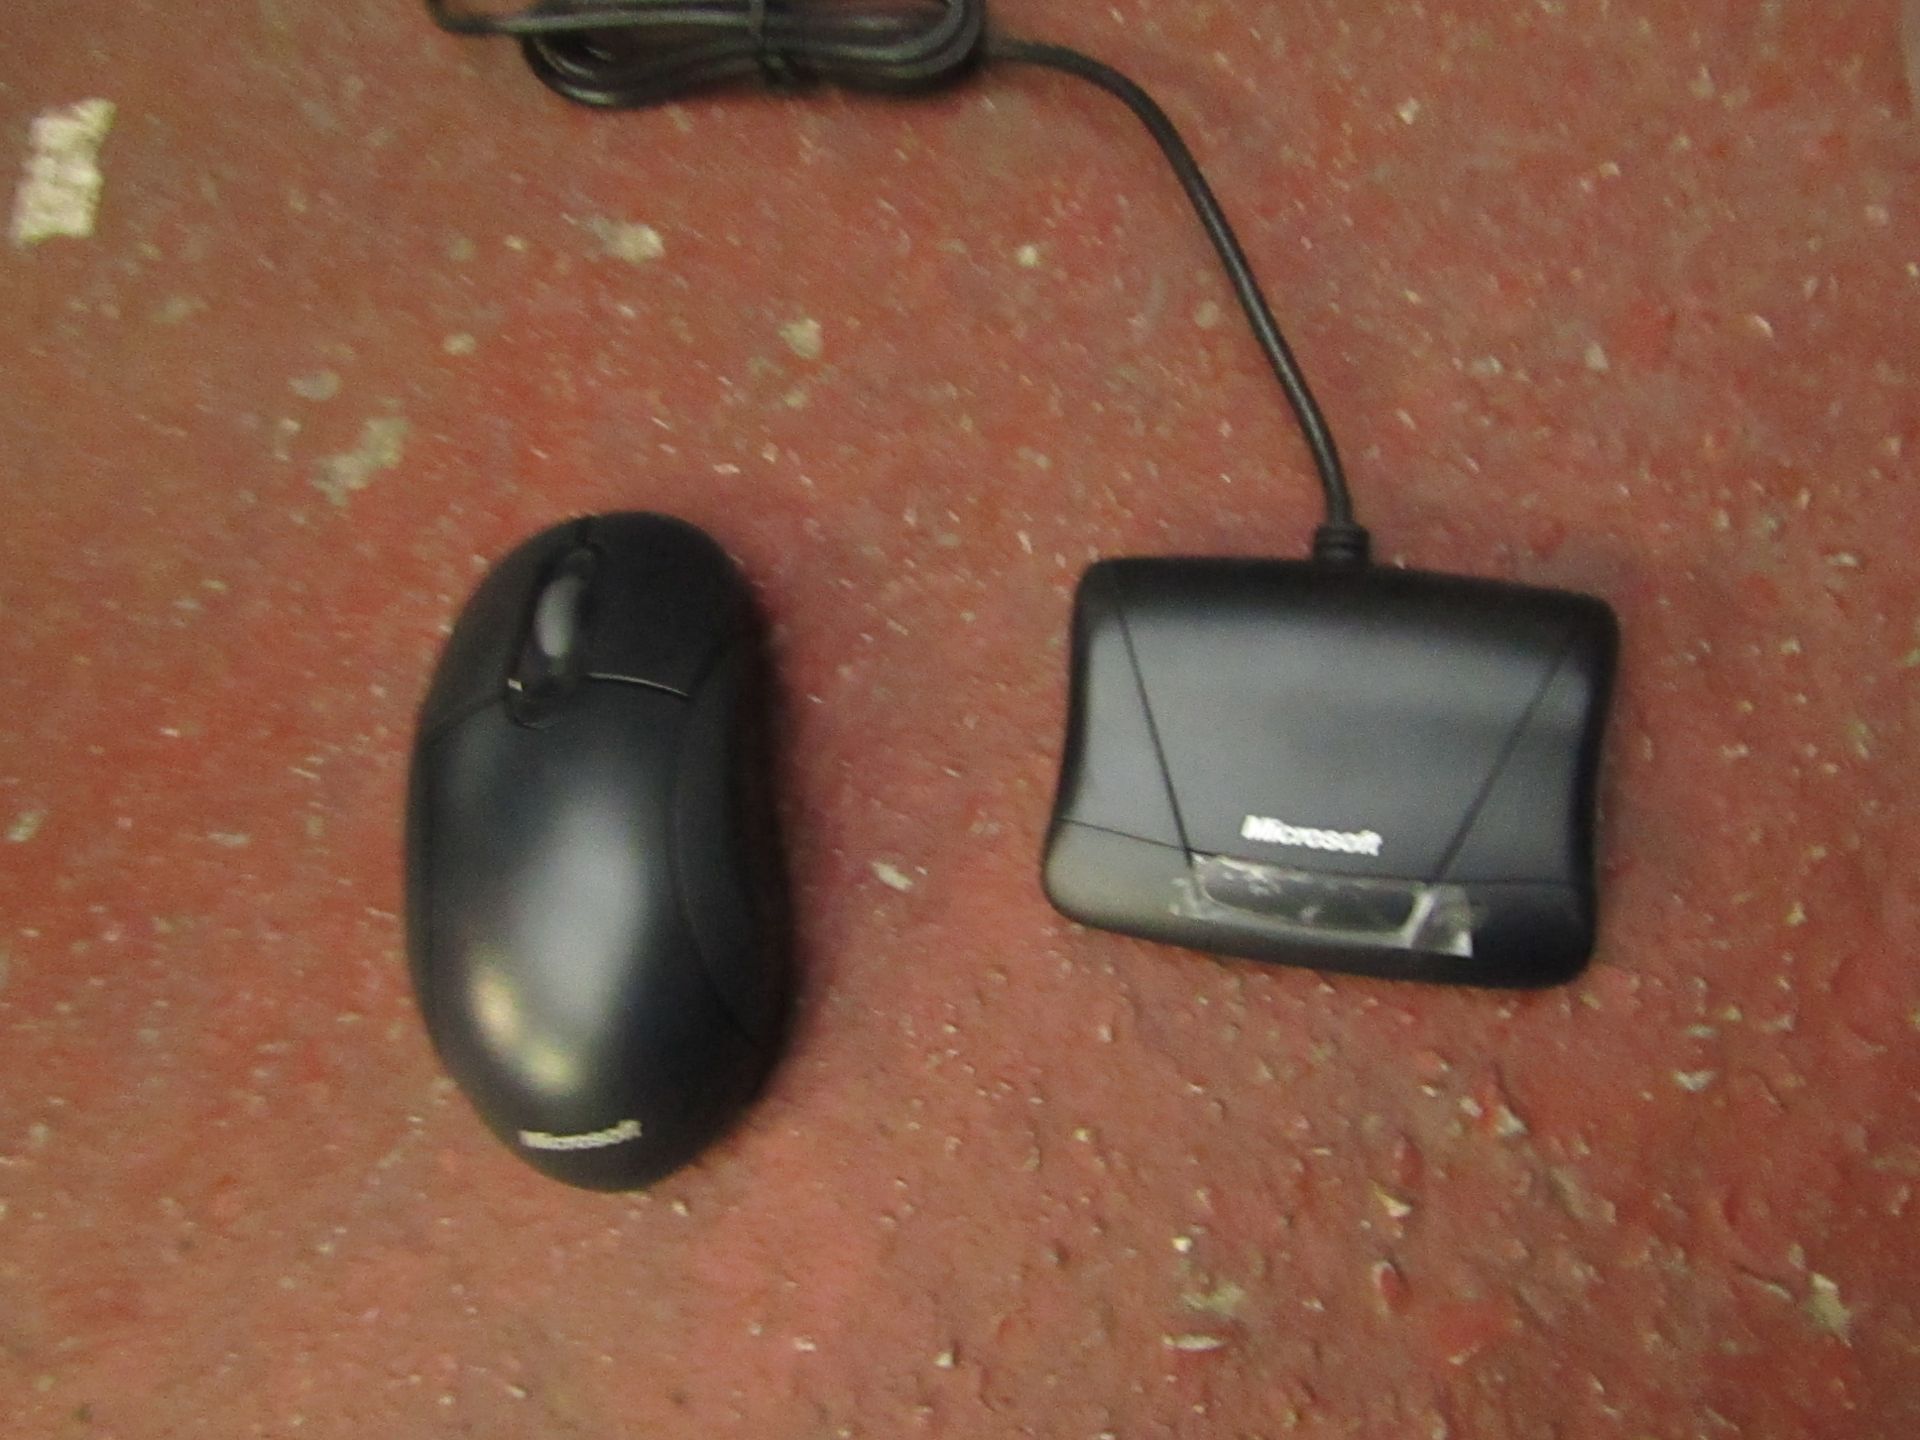 2x Microsoft - Wireless Mouse 700 2.0 with Receiver - All Packaged.